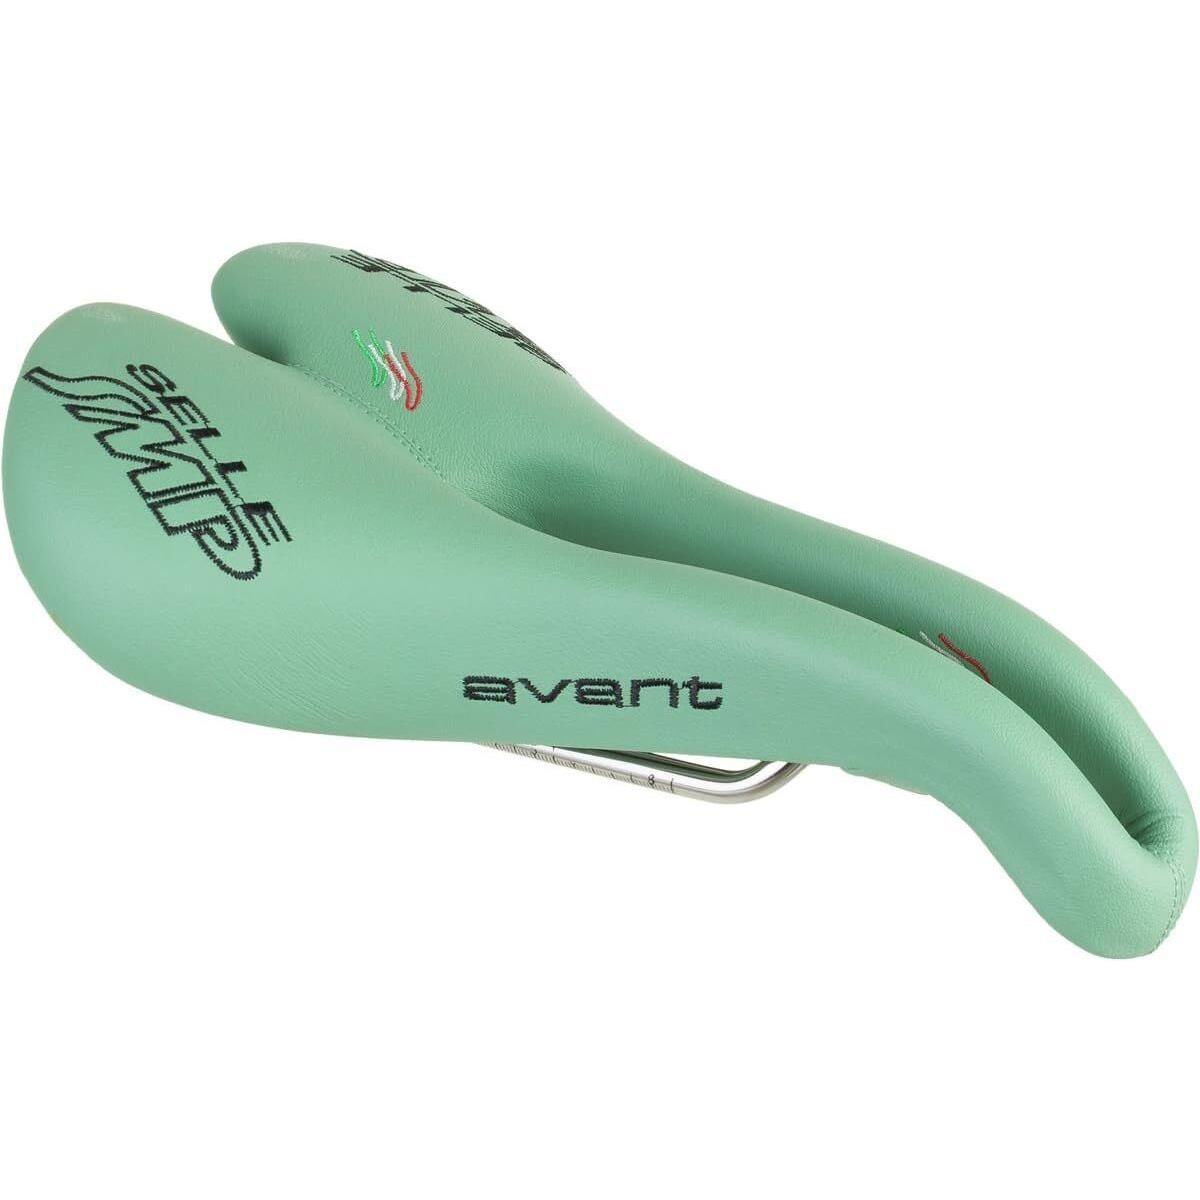 Selle Smp Avant Saddle Celeste One Size Lorica Microfibre Covering High Padding